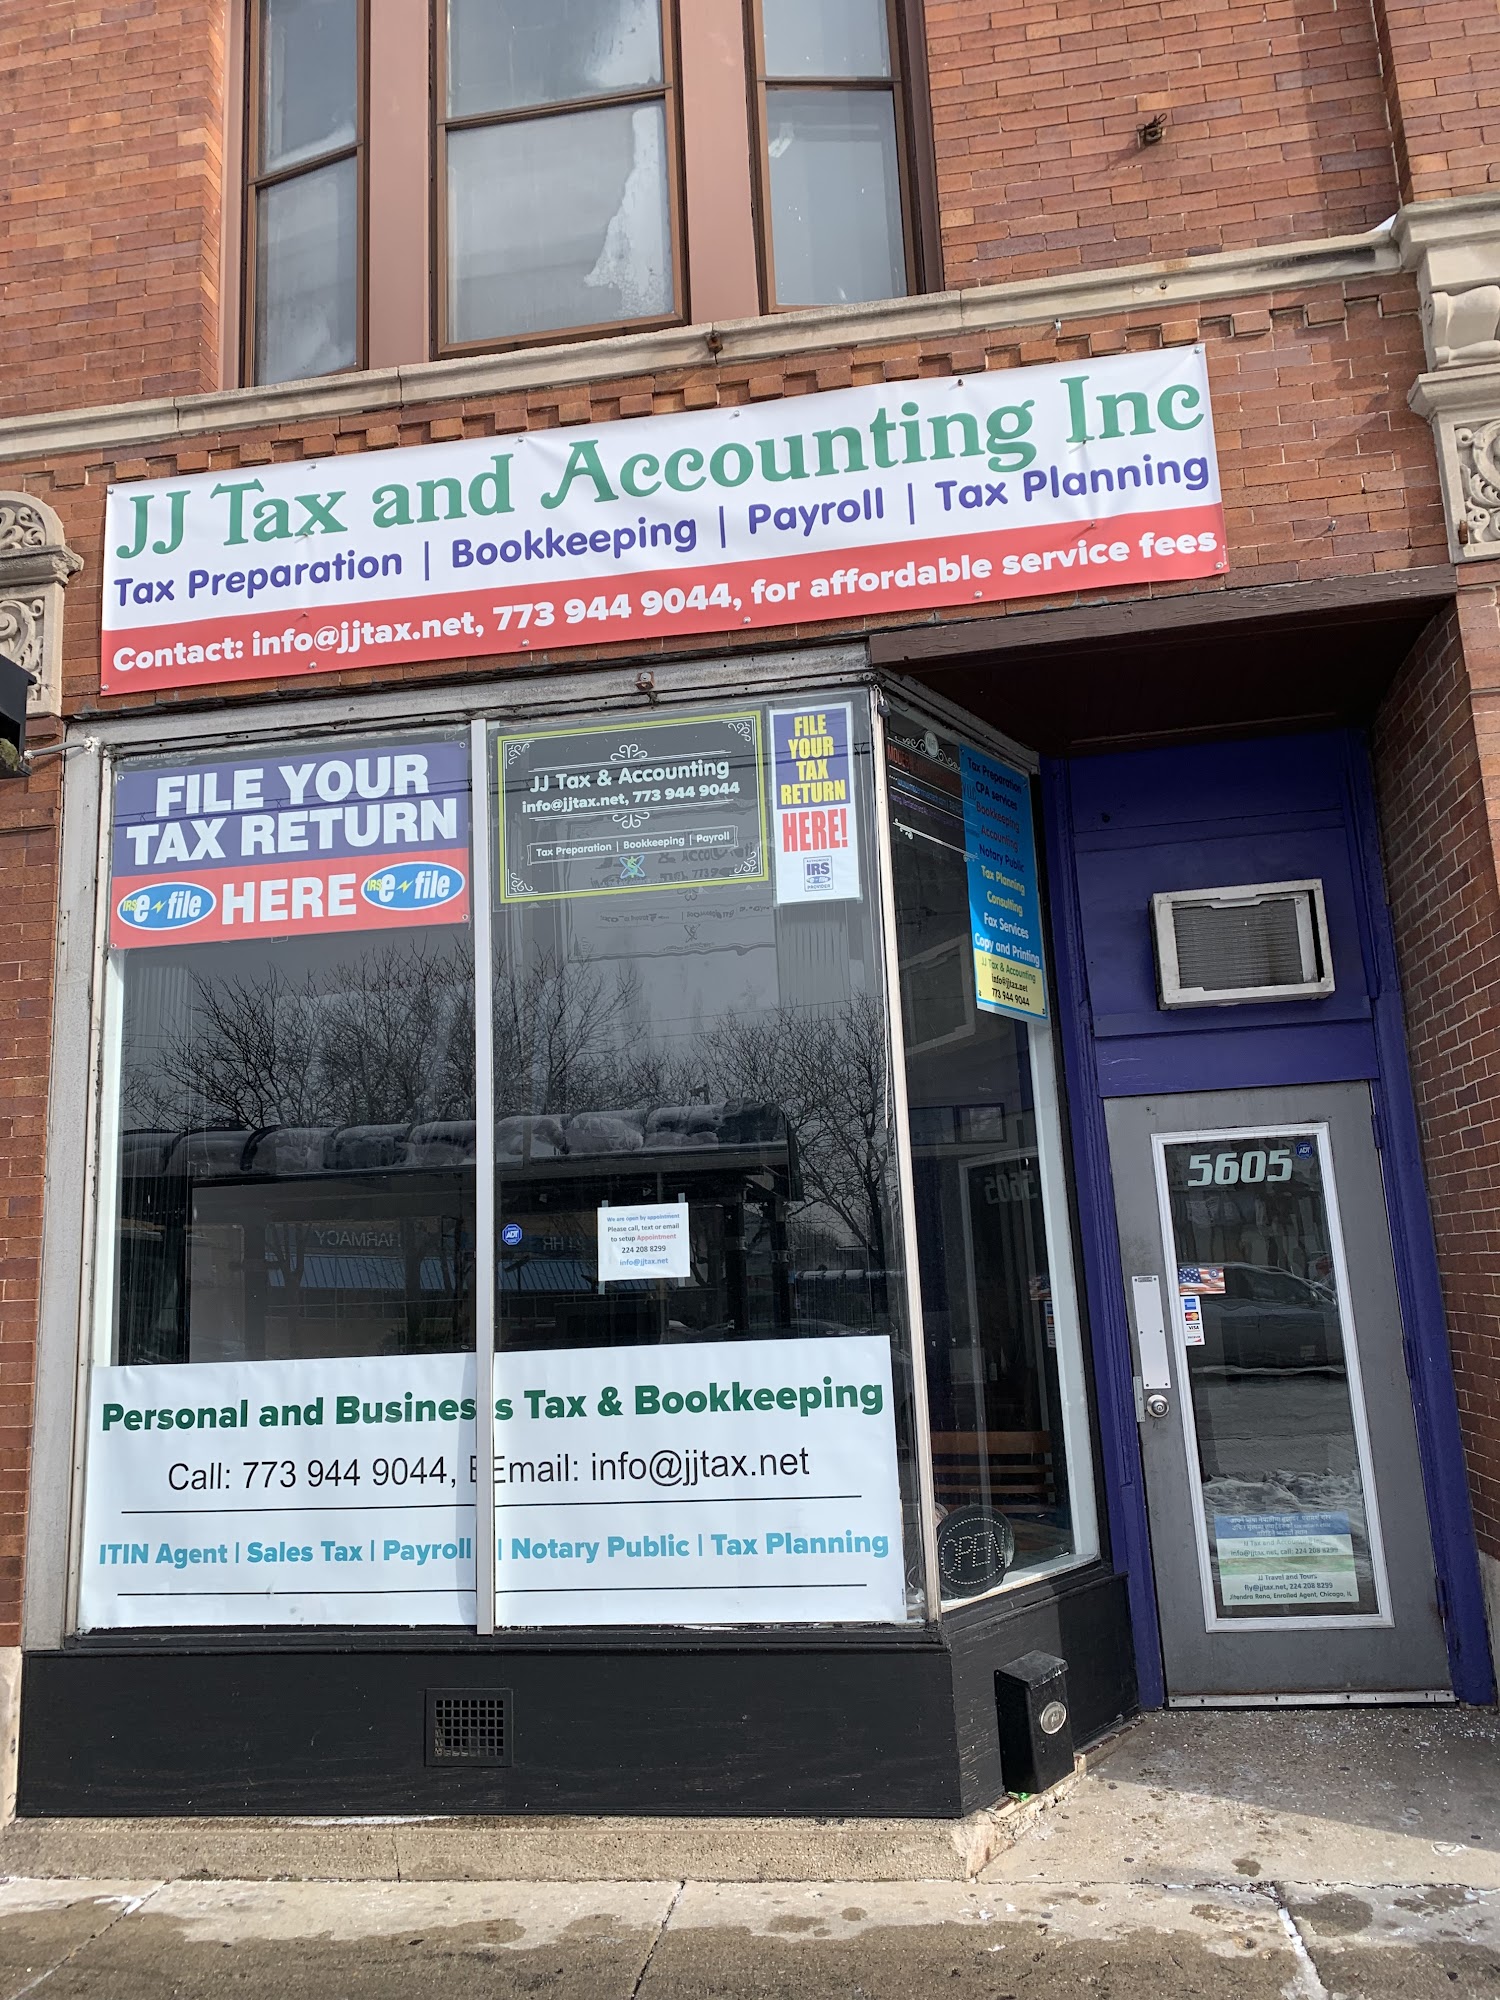 JJ Tax and Accounting Inc